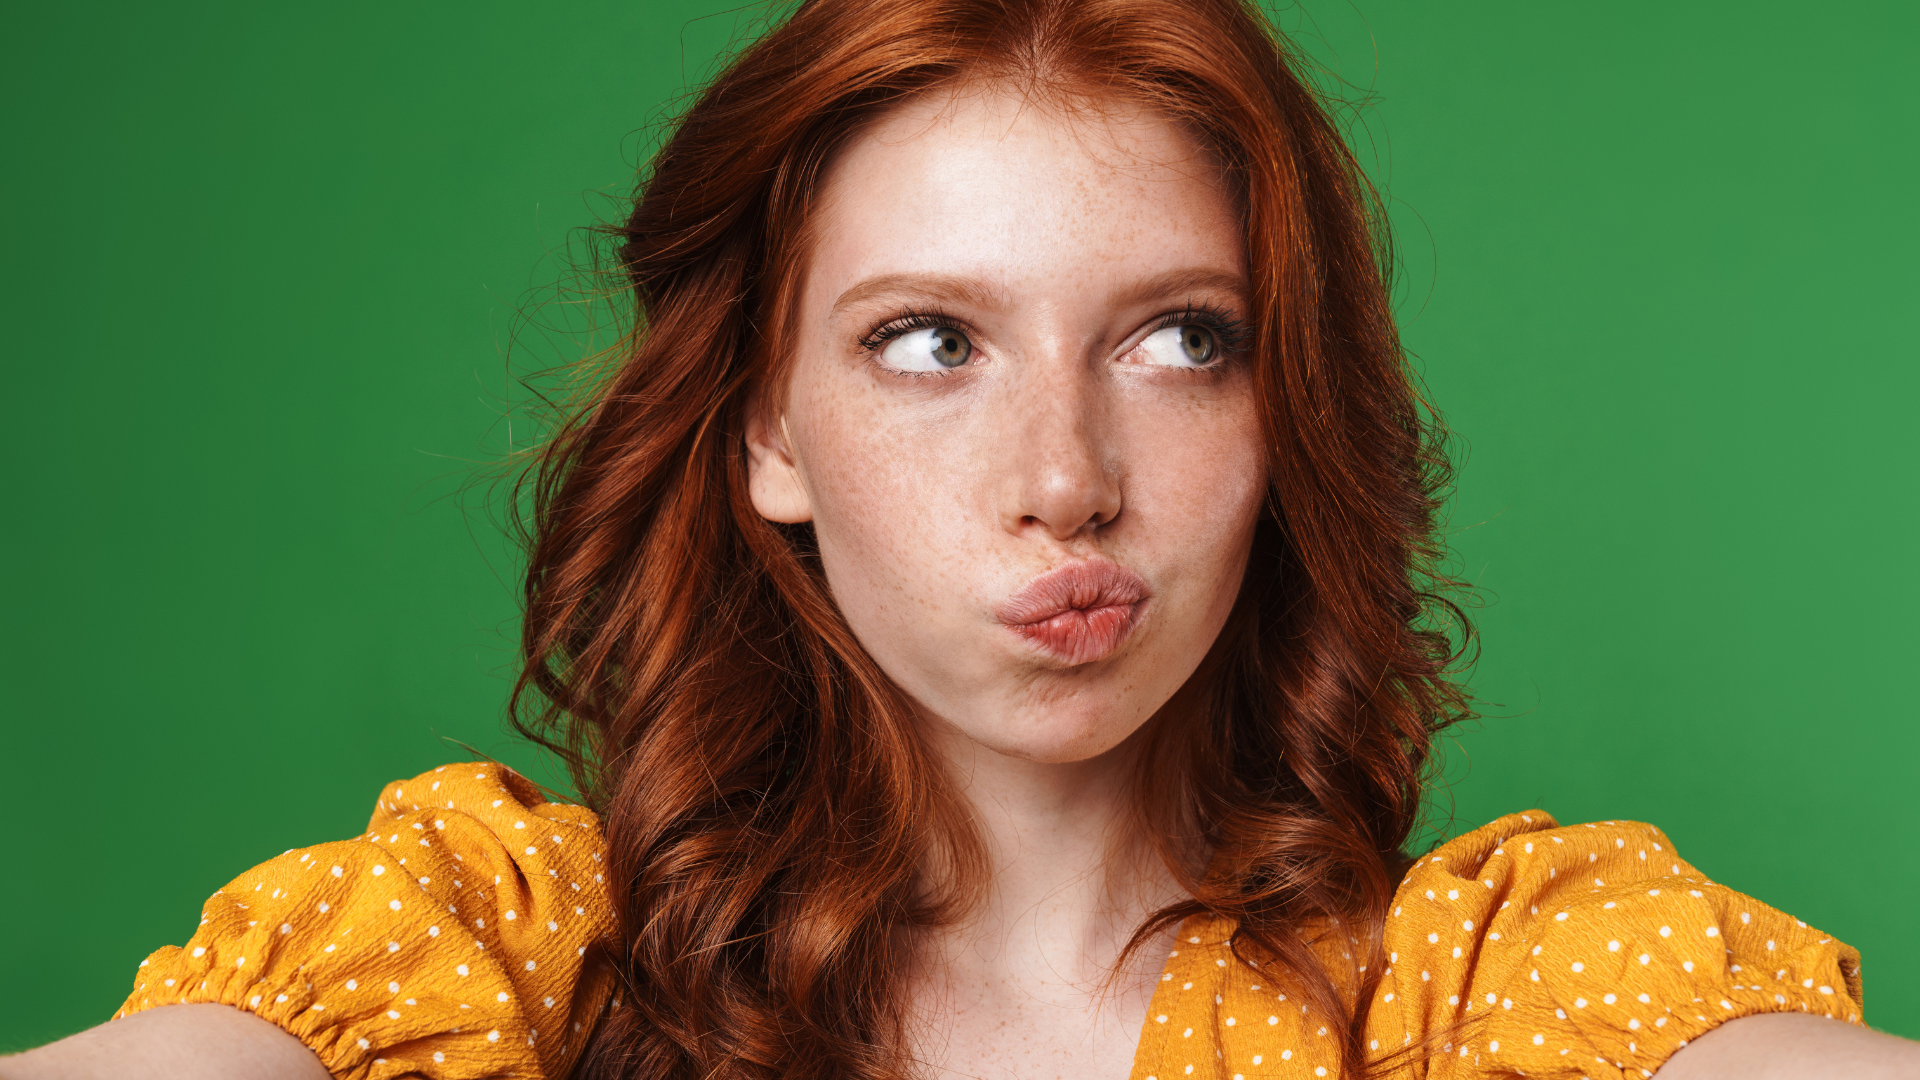 What Does Red Hair Symbolize? Let’s Talk About It